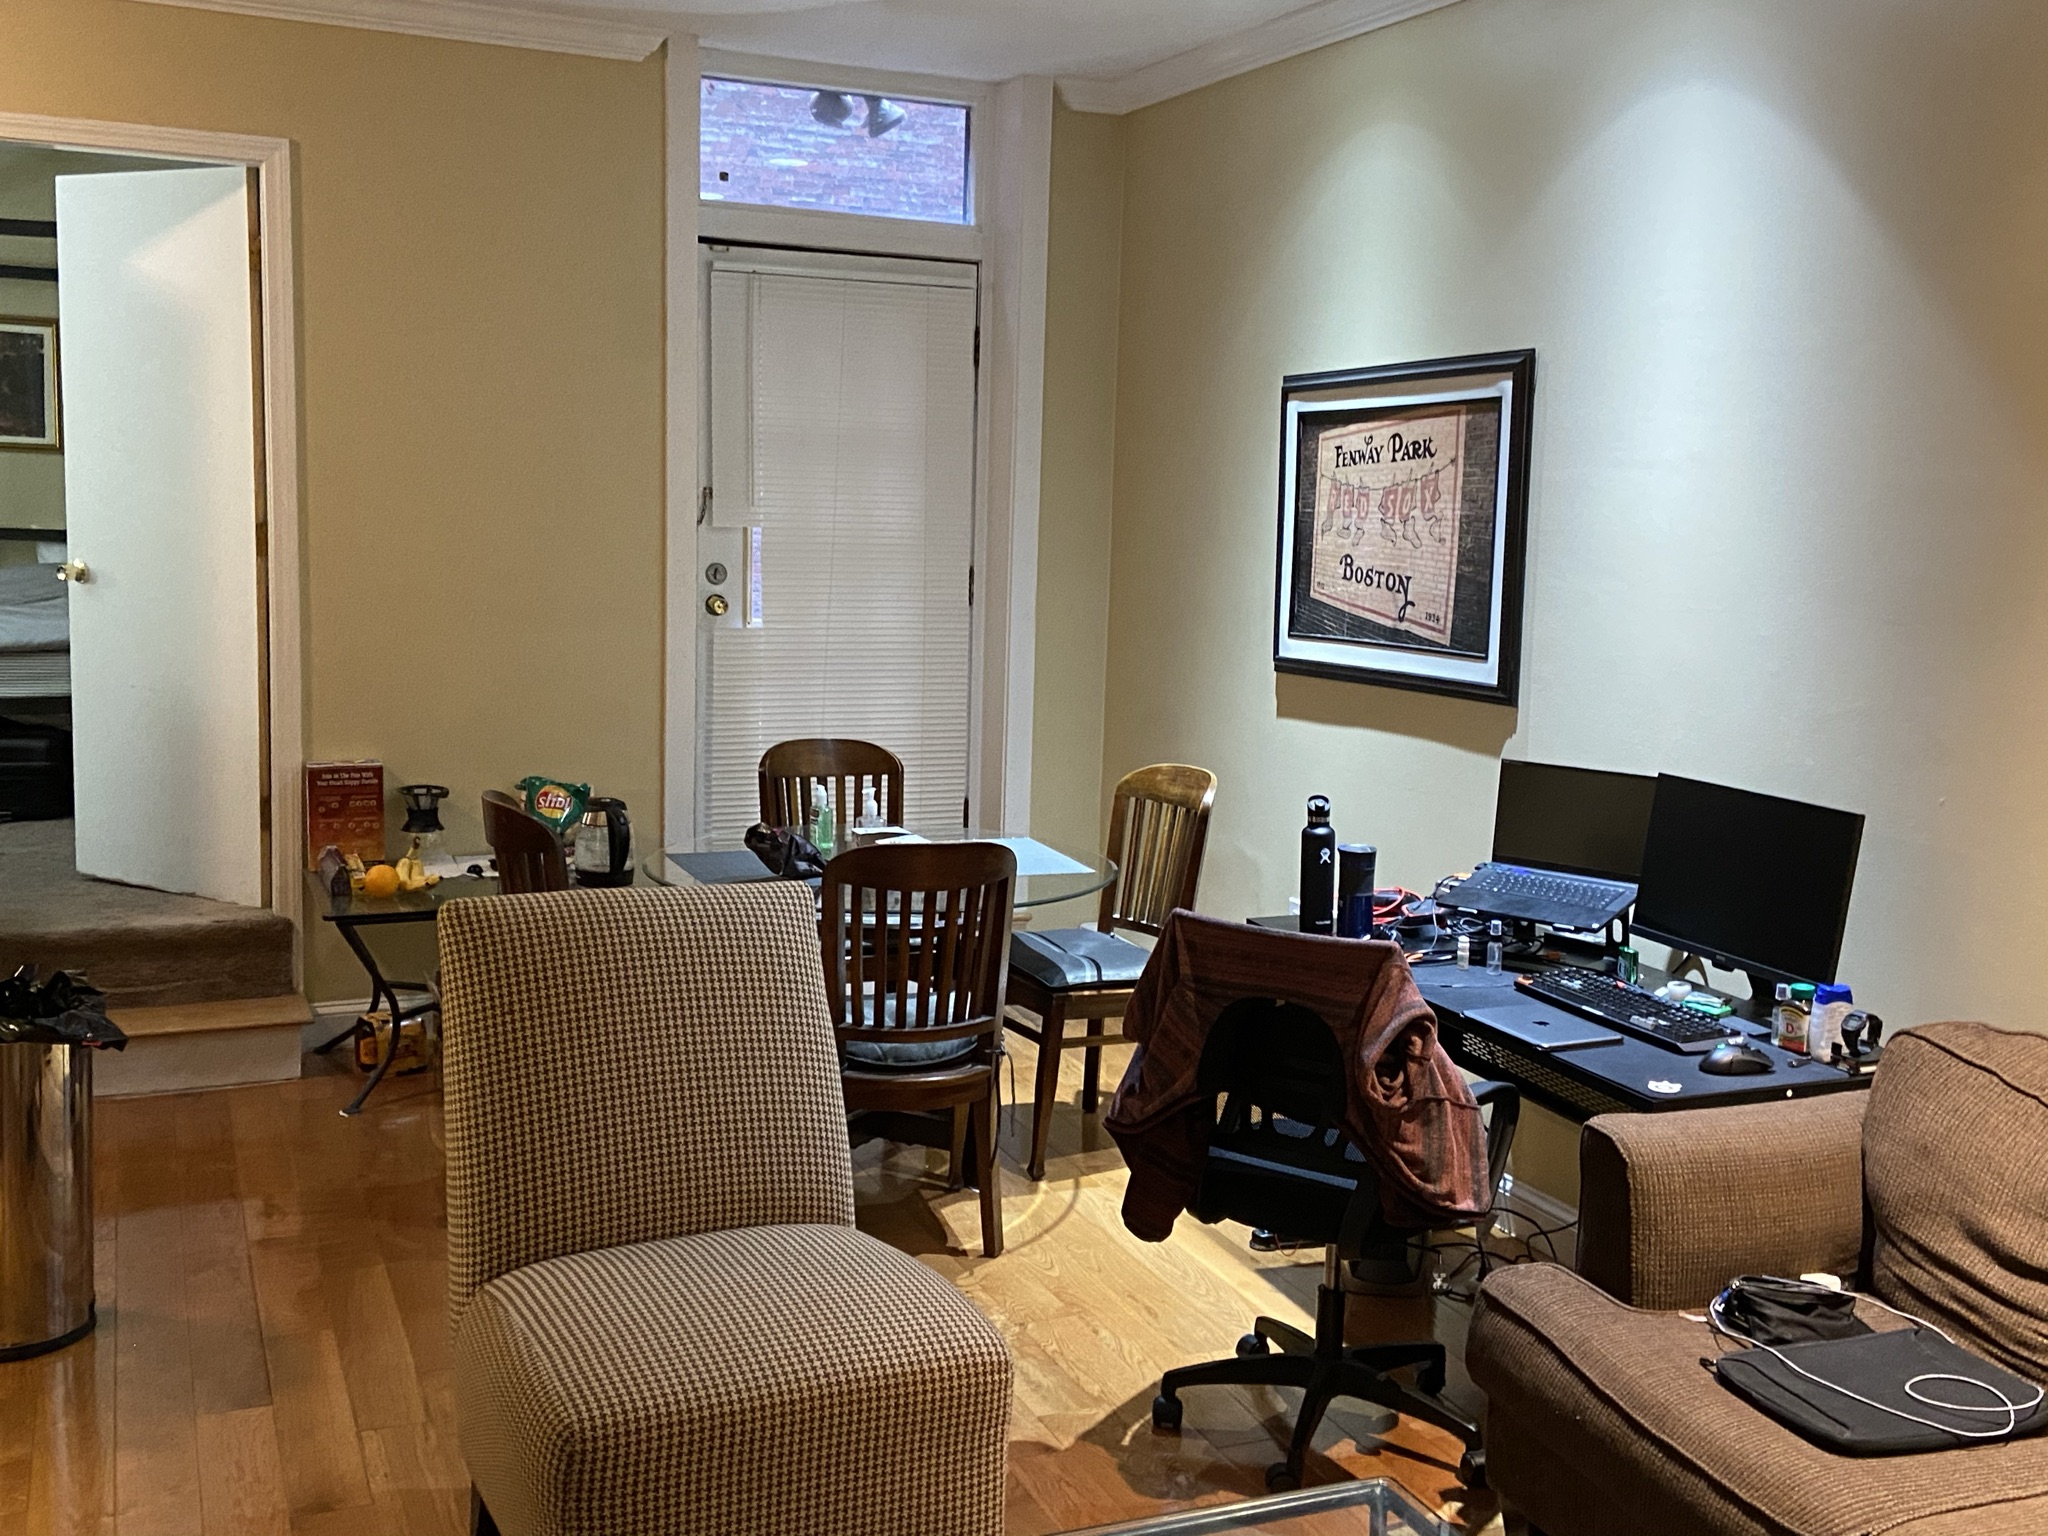 Photos of apartment on Hereford St.,Boston MA 02115